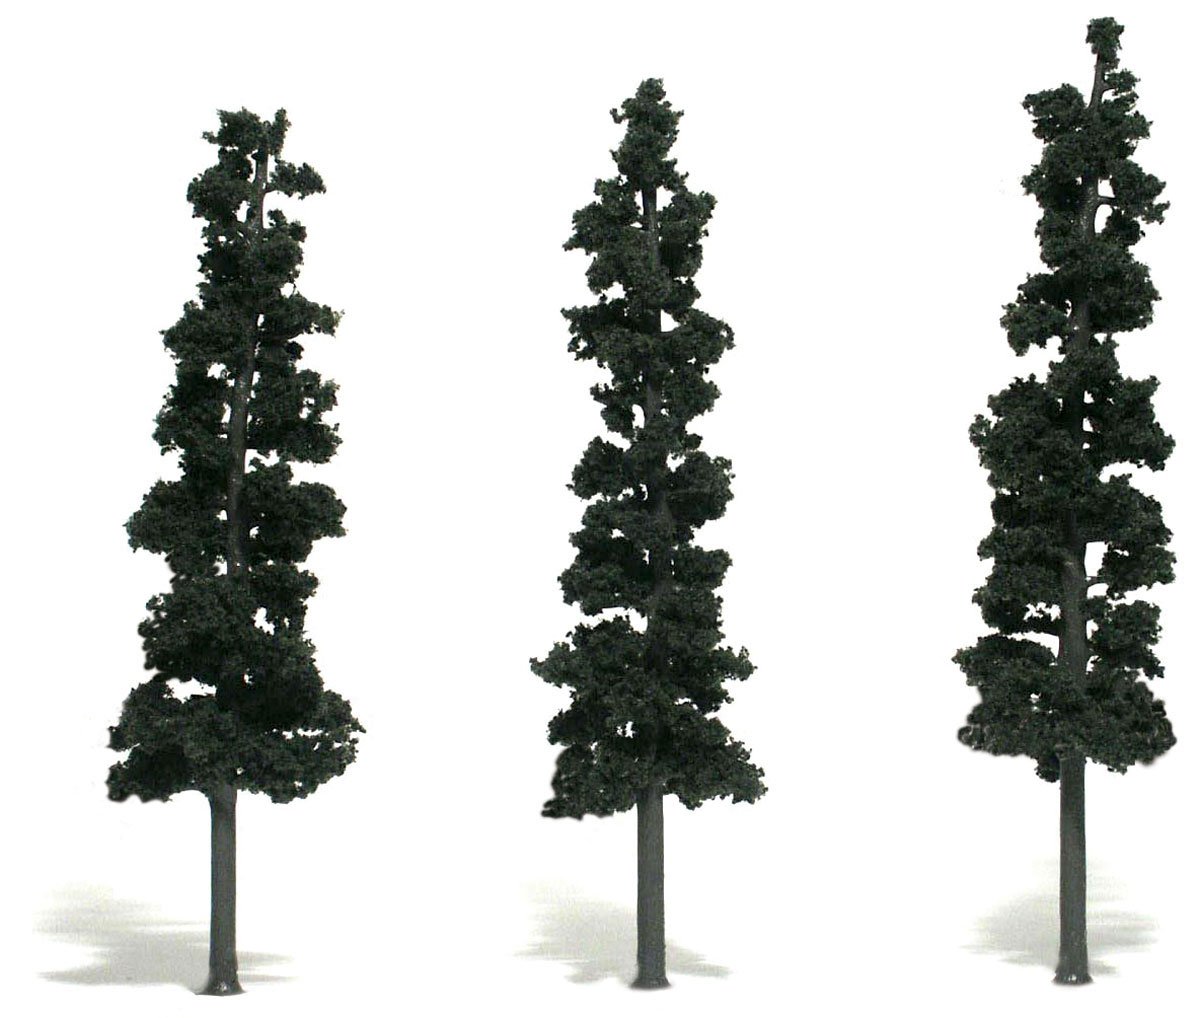 Conifer Green - Natural colors and realistic textures blend easily with other landscape products